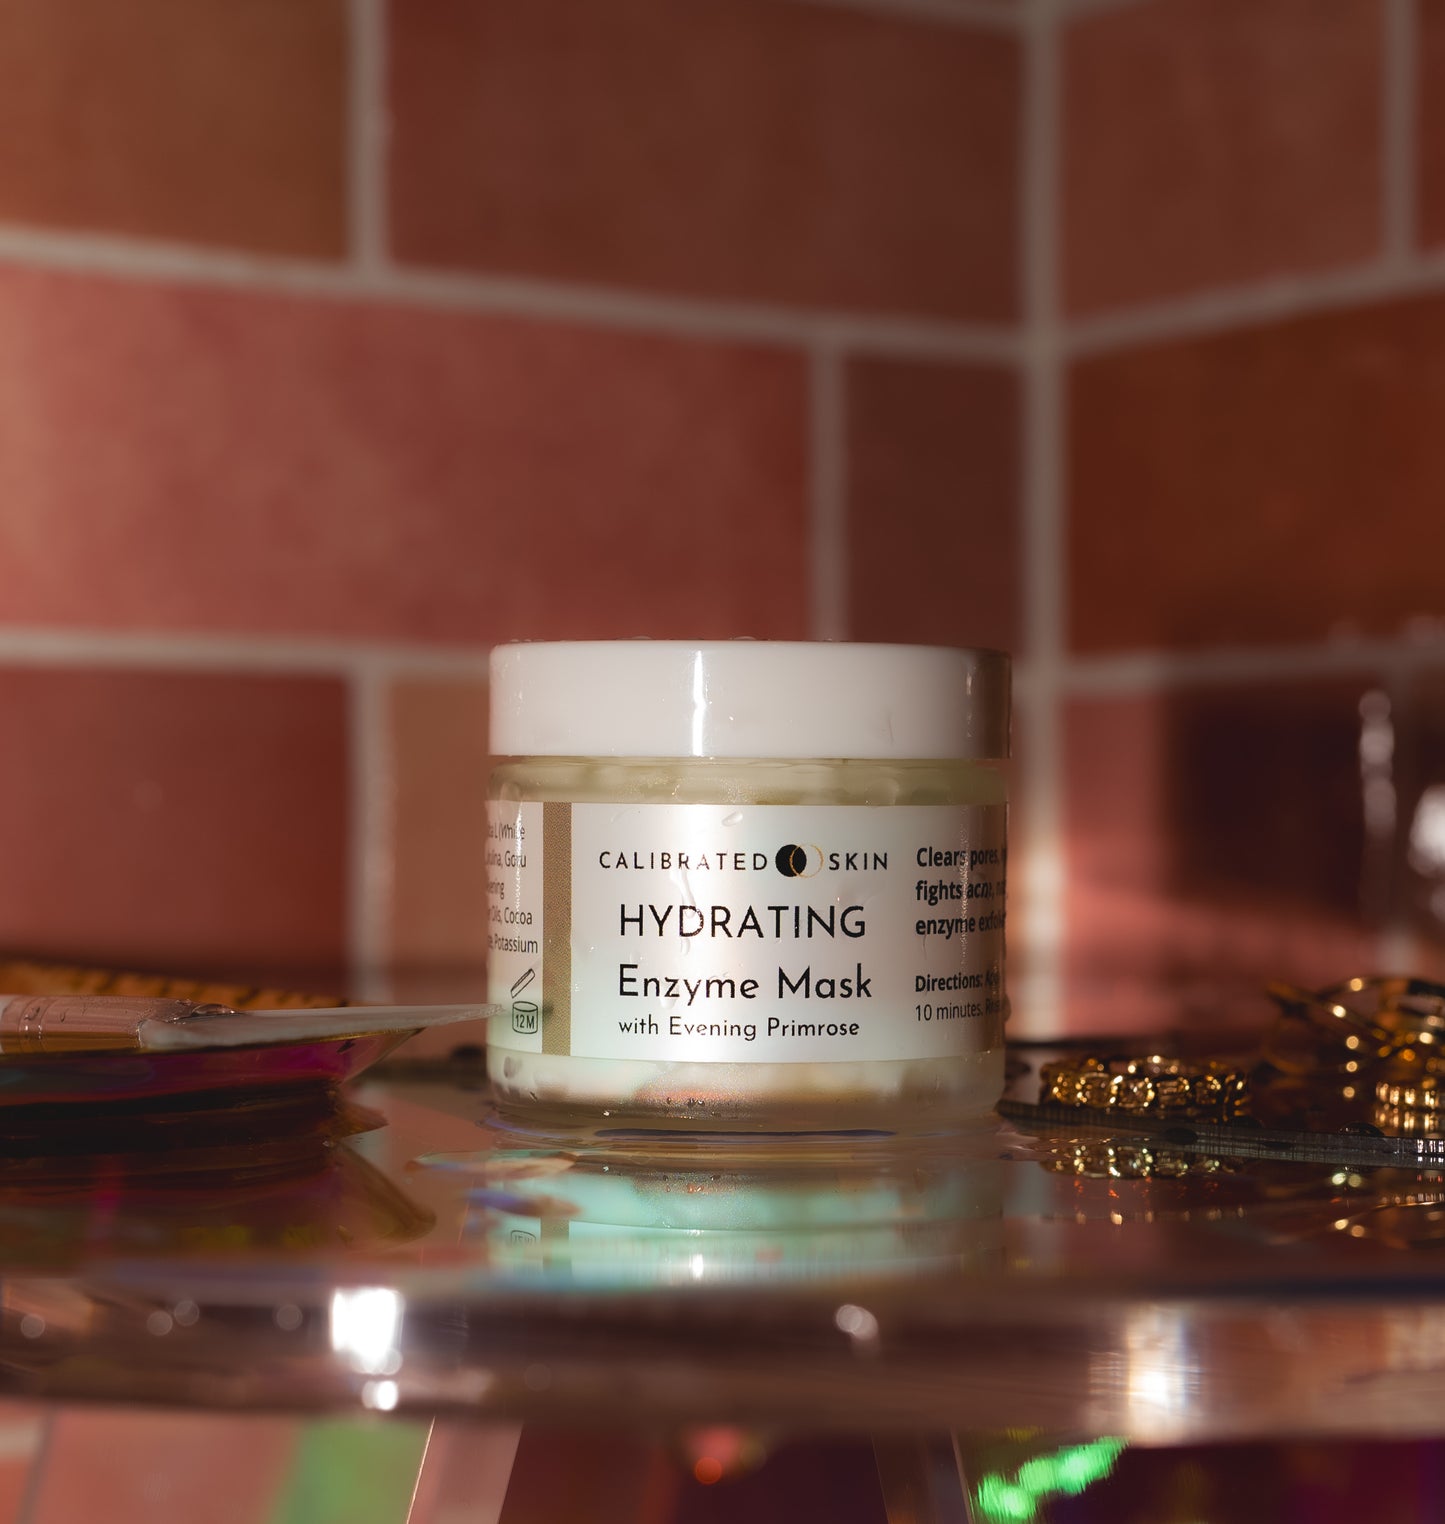 Hydrating Enzyme Face Mask (Clears clogged pores, natural exfoliant)